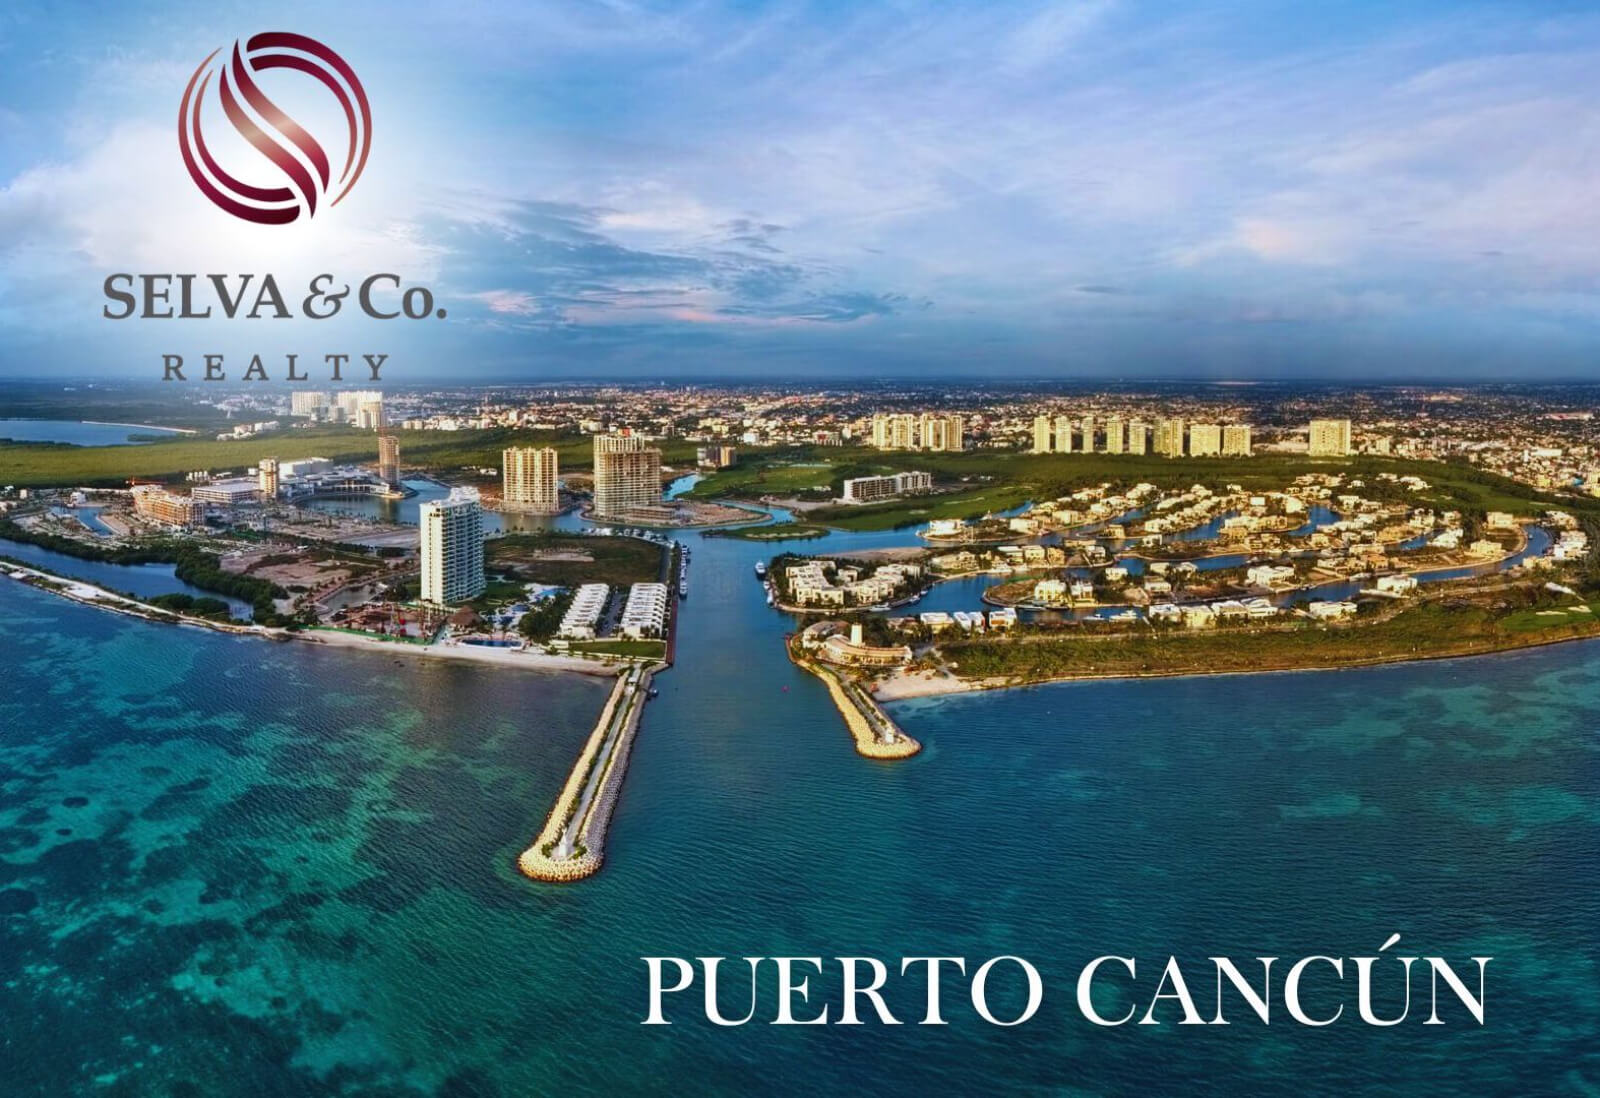 Ocean view condo with amenities: infinity pool, spa, gym, lounge area, event room, lobby, located in Puerto Cancun